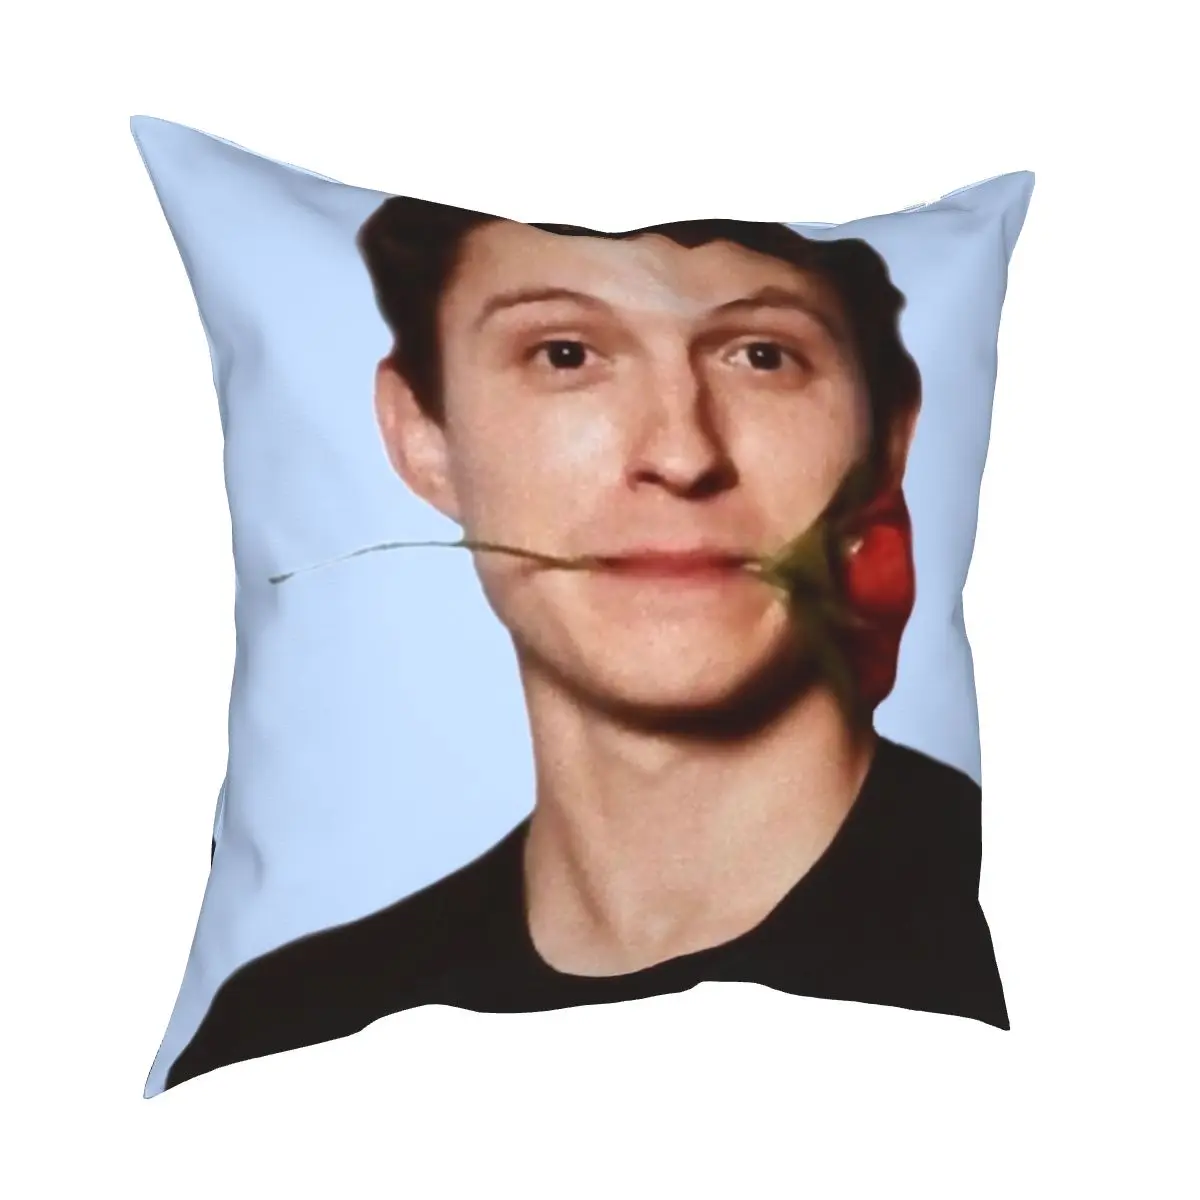 

Tom Holland Rose Flower Pillowcase Printed Polyester Cushion Cover Decorative Pillow Case Cover Home Zippered 45*45cm